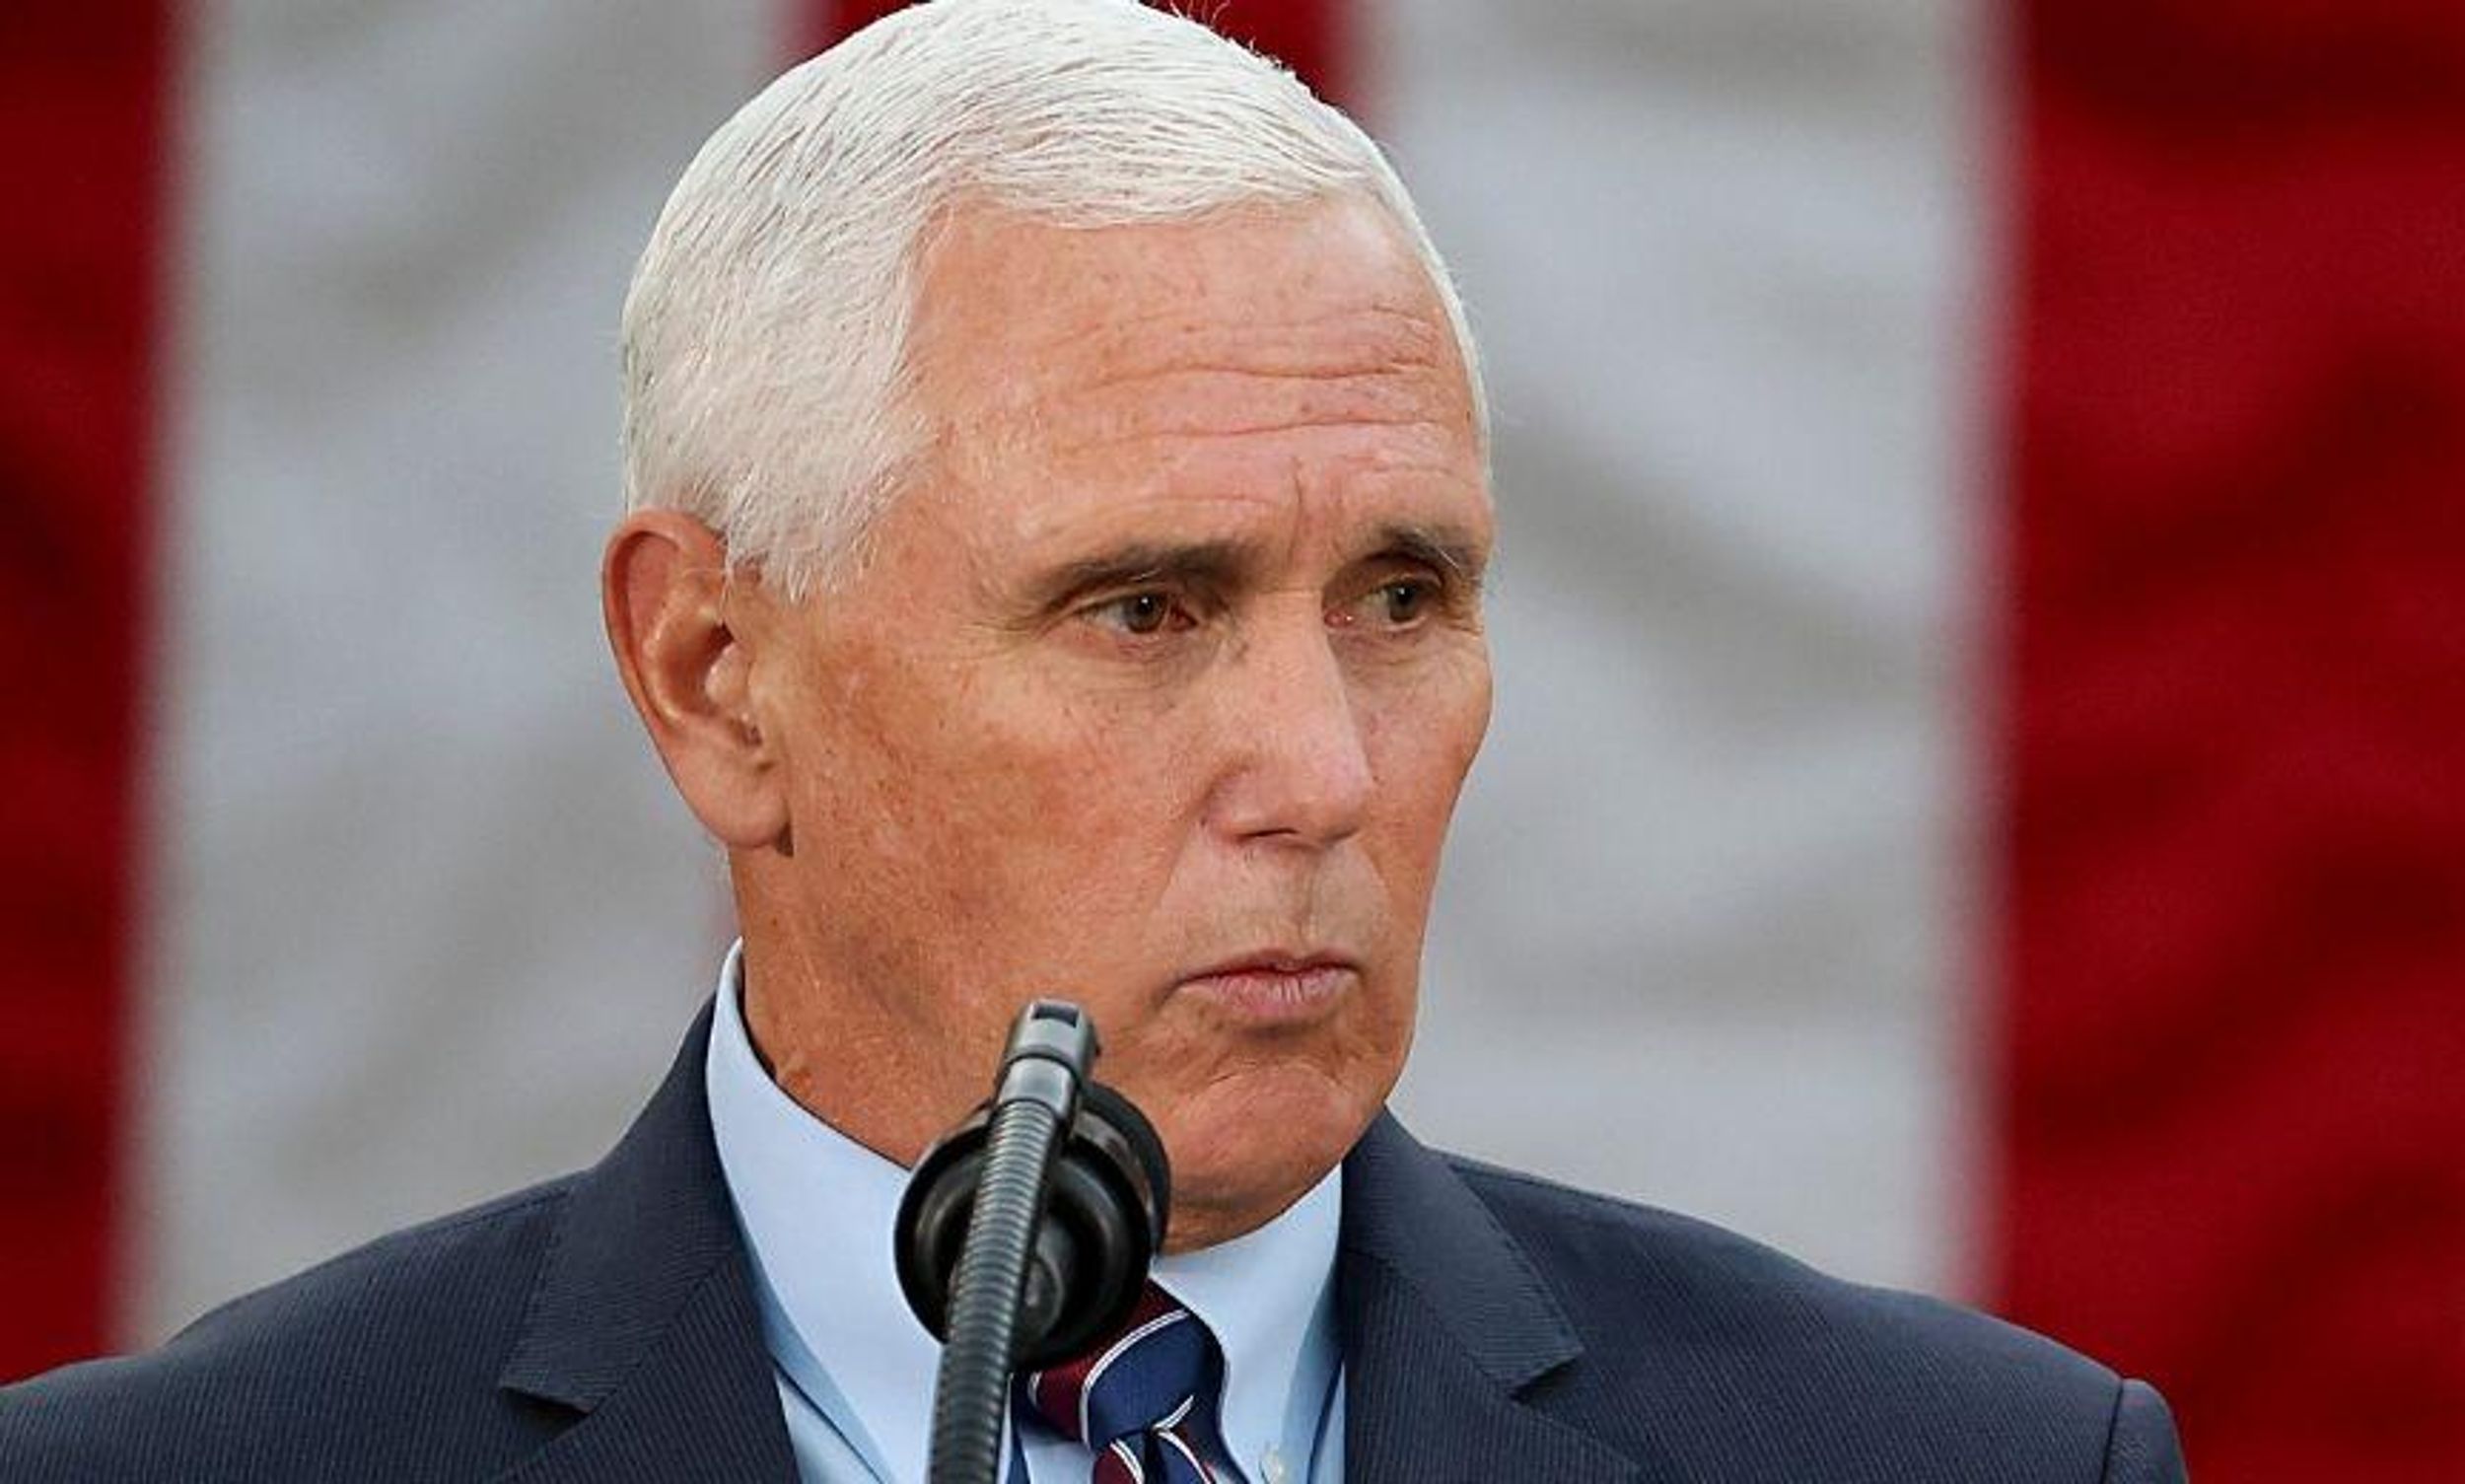 Pro-Trump Pollster Quotes Stalin In Bizarre Twitter Thread Claiming Pence Can Refuse to Count All Electoral Votes